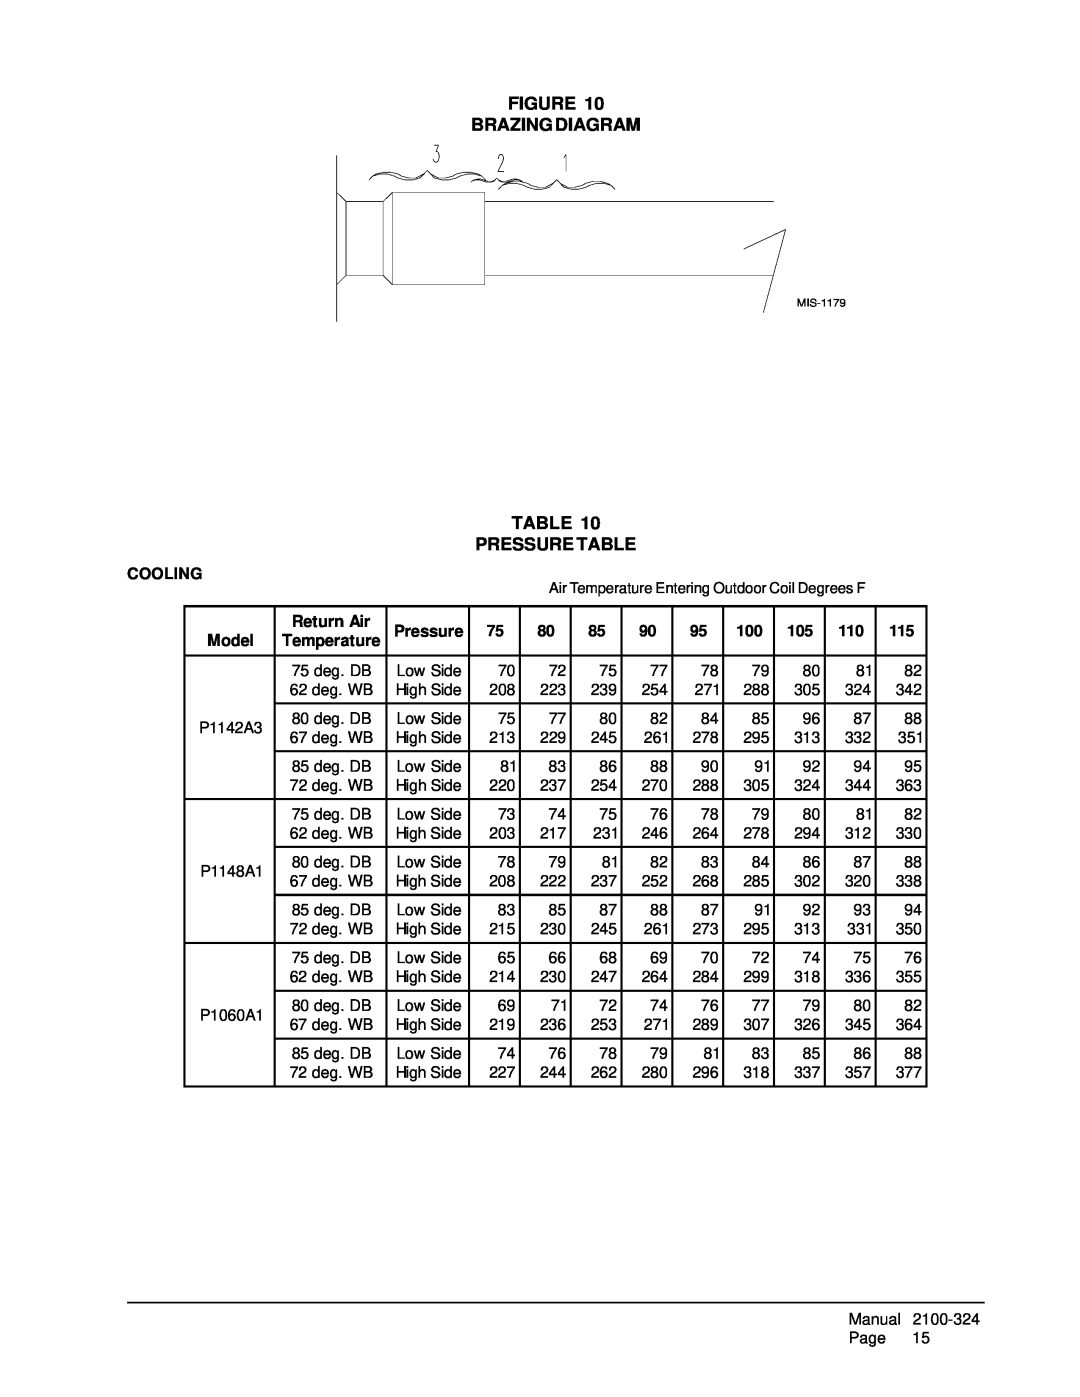 Bard P1060A1, P1148A1, P1142A3 installation instructions Figure Brazing Diagram, Table Pressure Table 